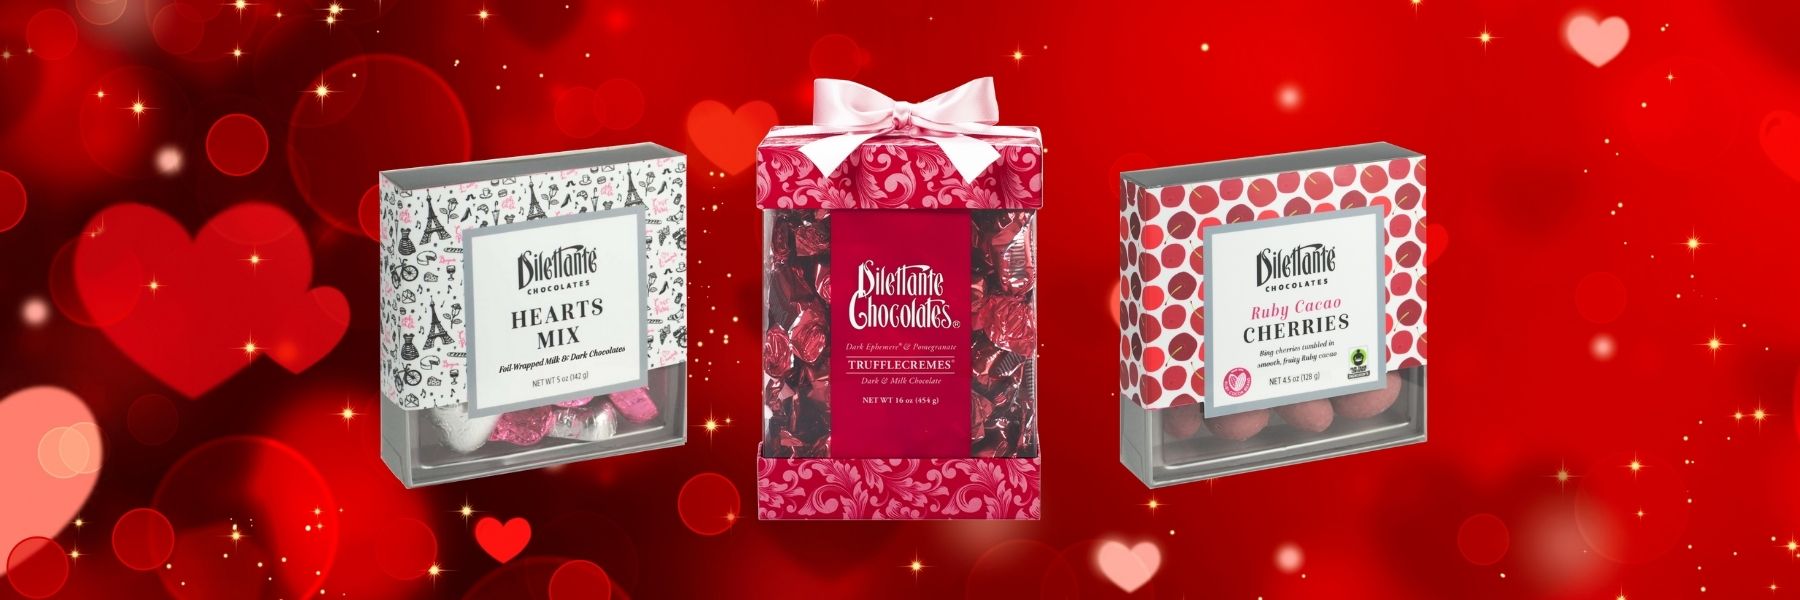 Dilettante Chocolates Valentines Gift Collection Featuring Milk Chocolate Heart Foils, Pomegranate TruffleCremes and Ruby Cacao Bing Cherries